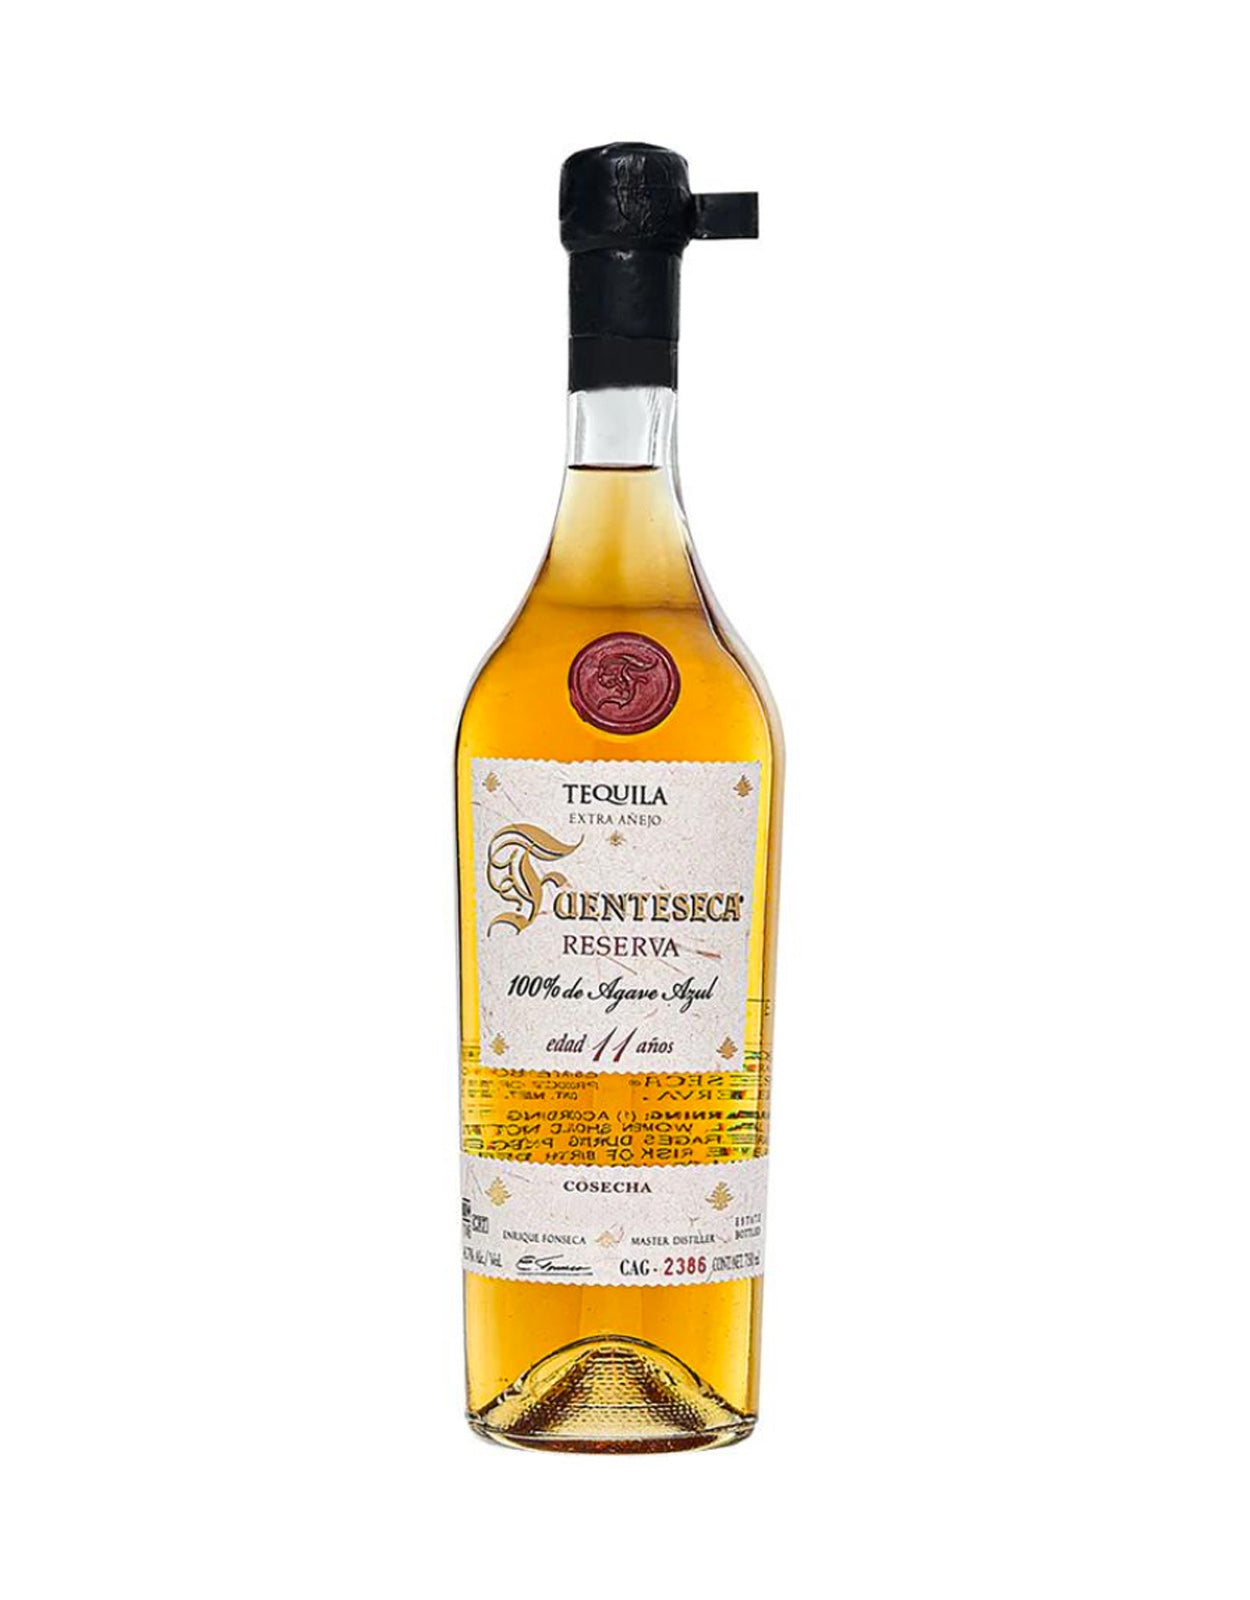 Tequila Fuenteseca Extra Anejo 11 Year Old